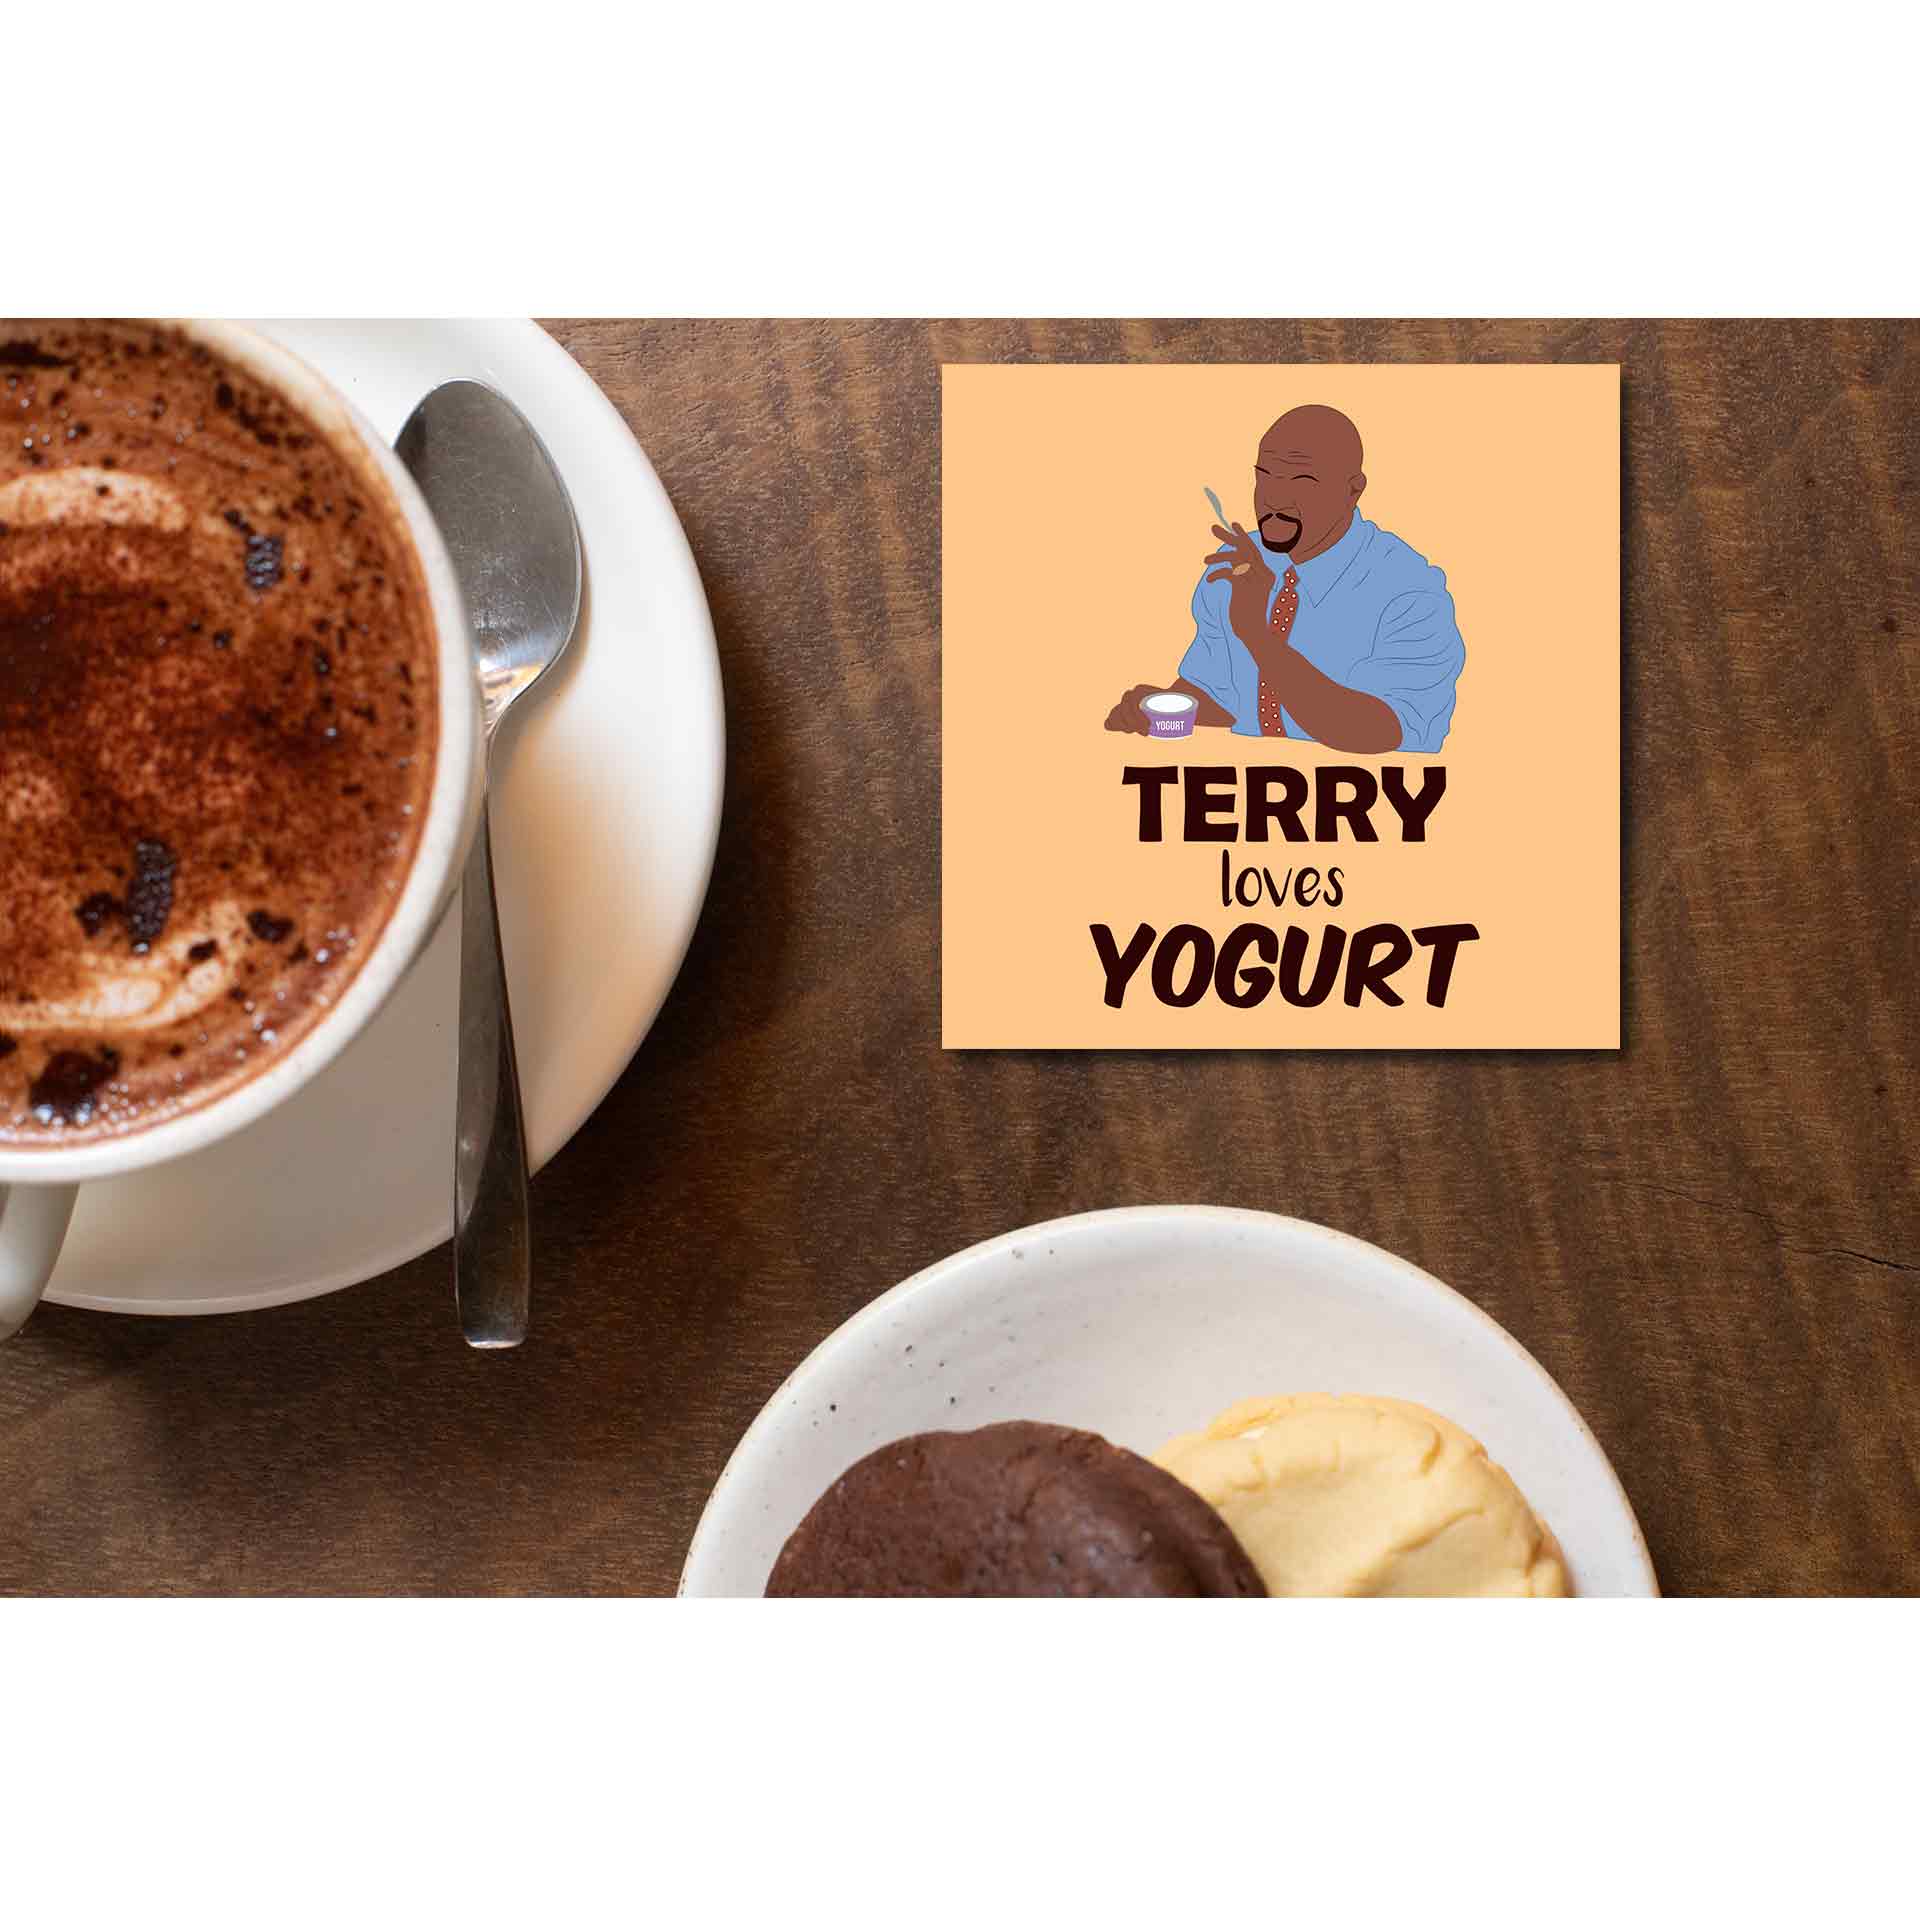 brooklyn nine-nine terry loves yogurt coasters wooden table cups indian buy online india the banyan tee tbt men women girls boys unisex  detective jake peralta terry charles boyle gina linetti andy samberg merchandise clothing acceessories